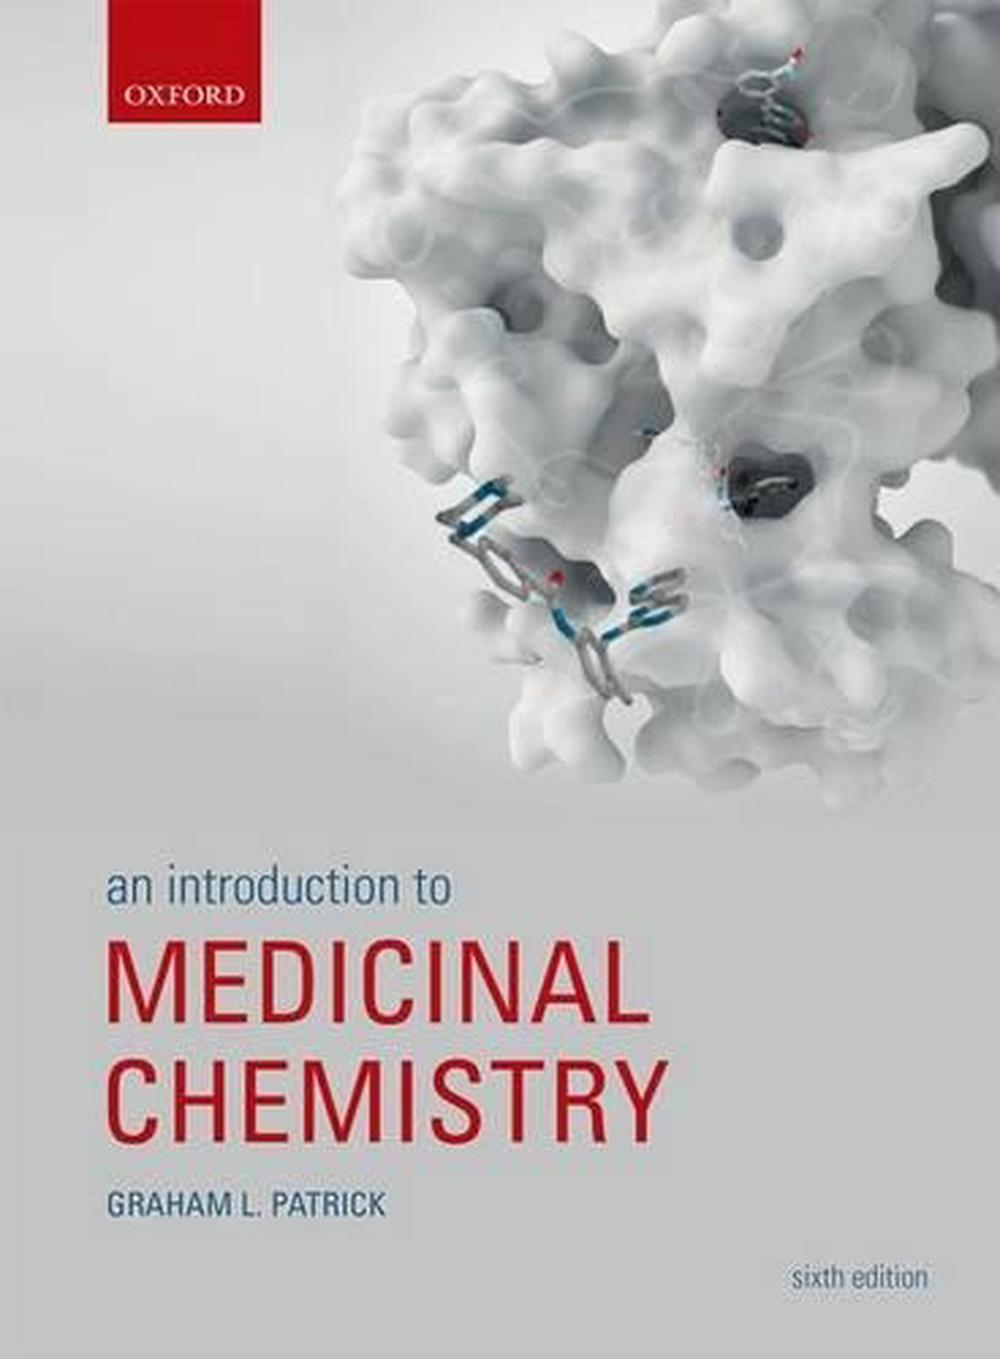 at　Graham　9780198749691　to　Patrick,　6th　Buy　An　by　Introduction　Edition　The　Medicinal　Chemistry,　online　Paperback,　Nile